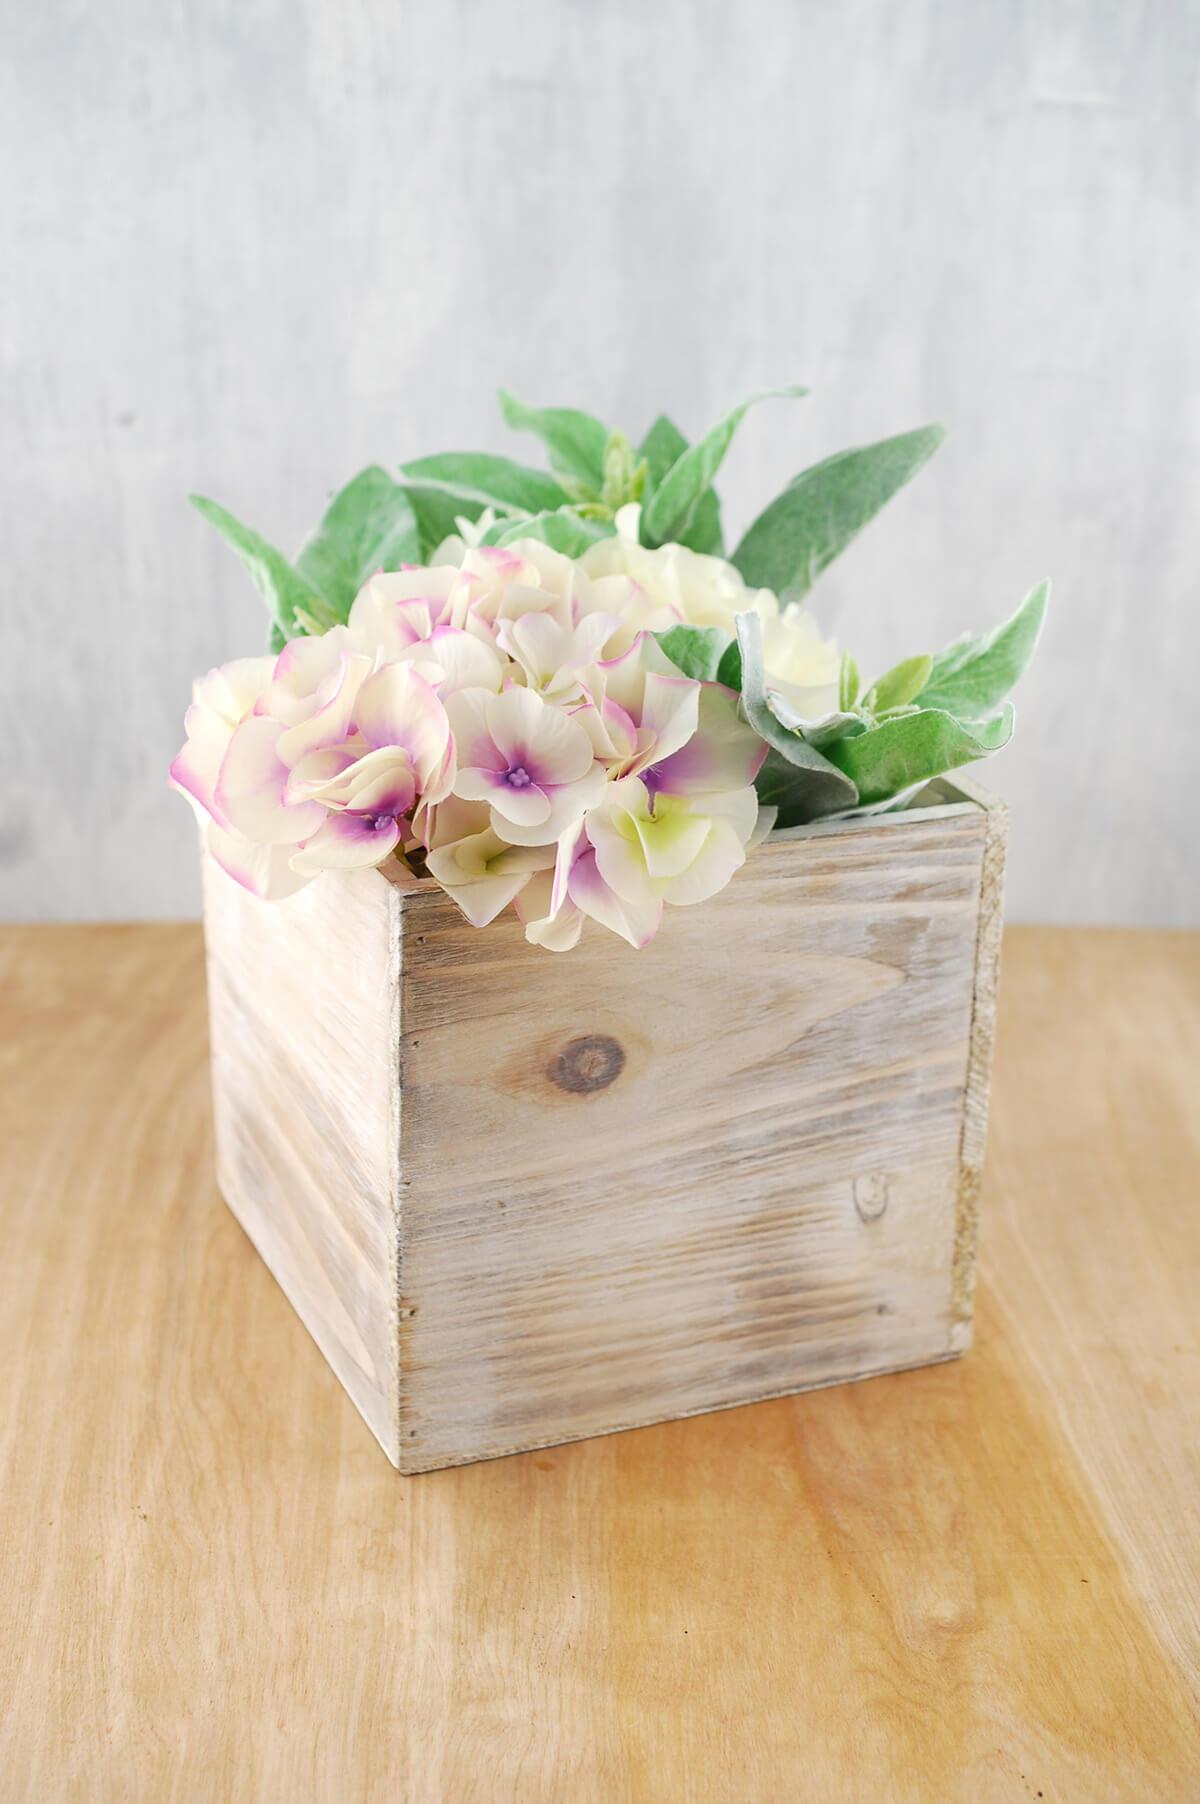 Whitewashed Wood Planter 7in